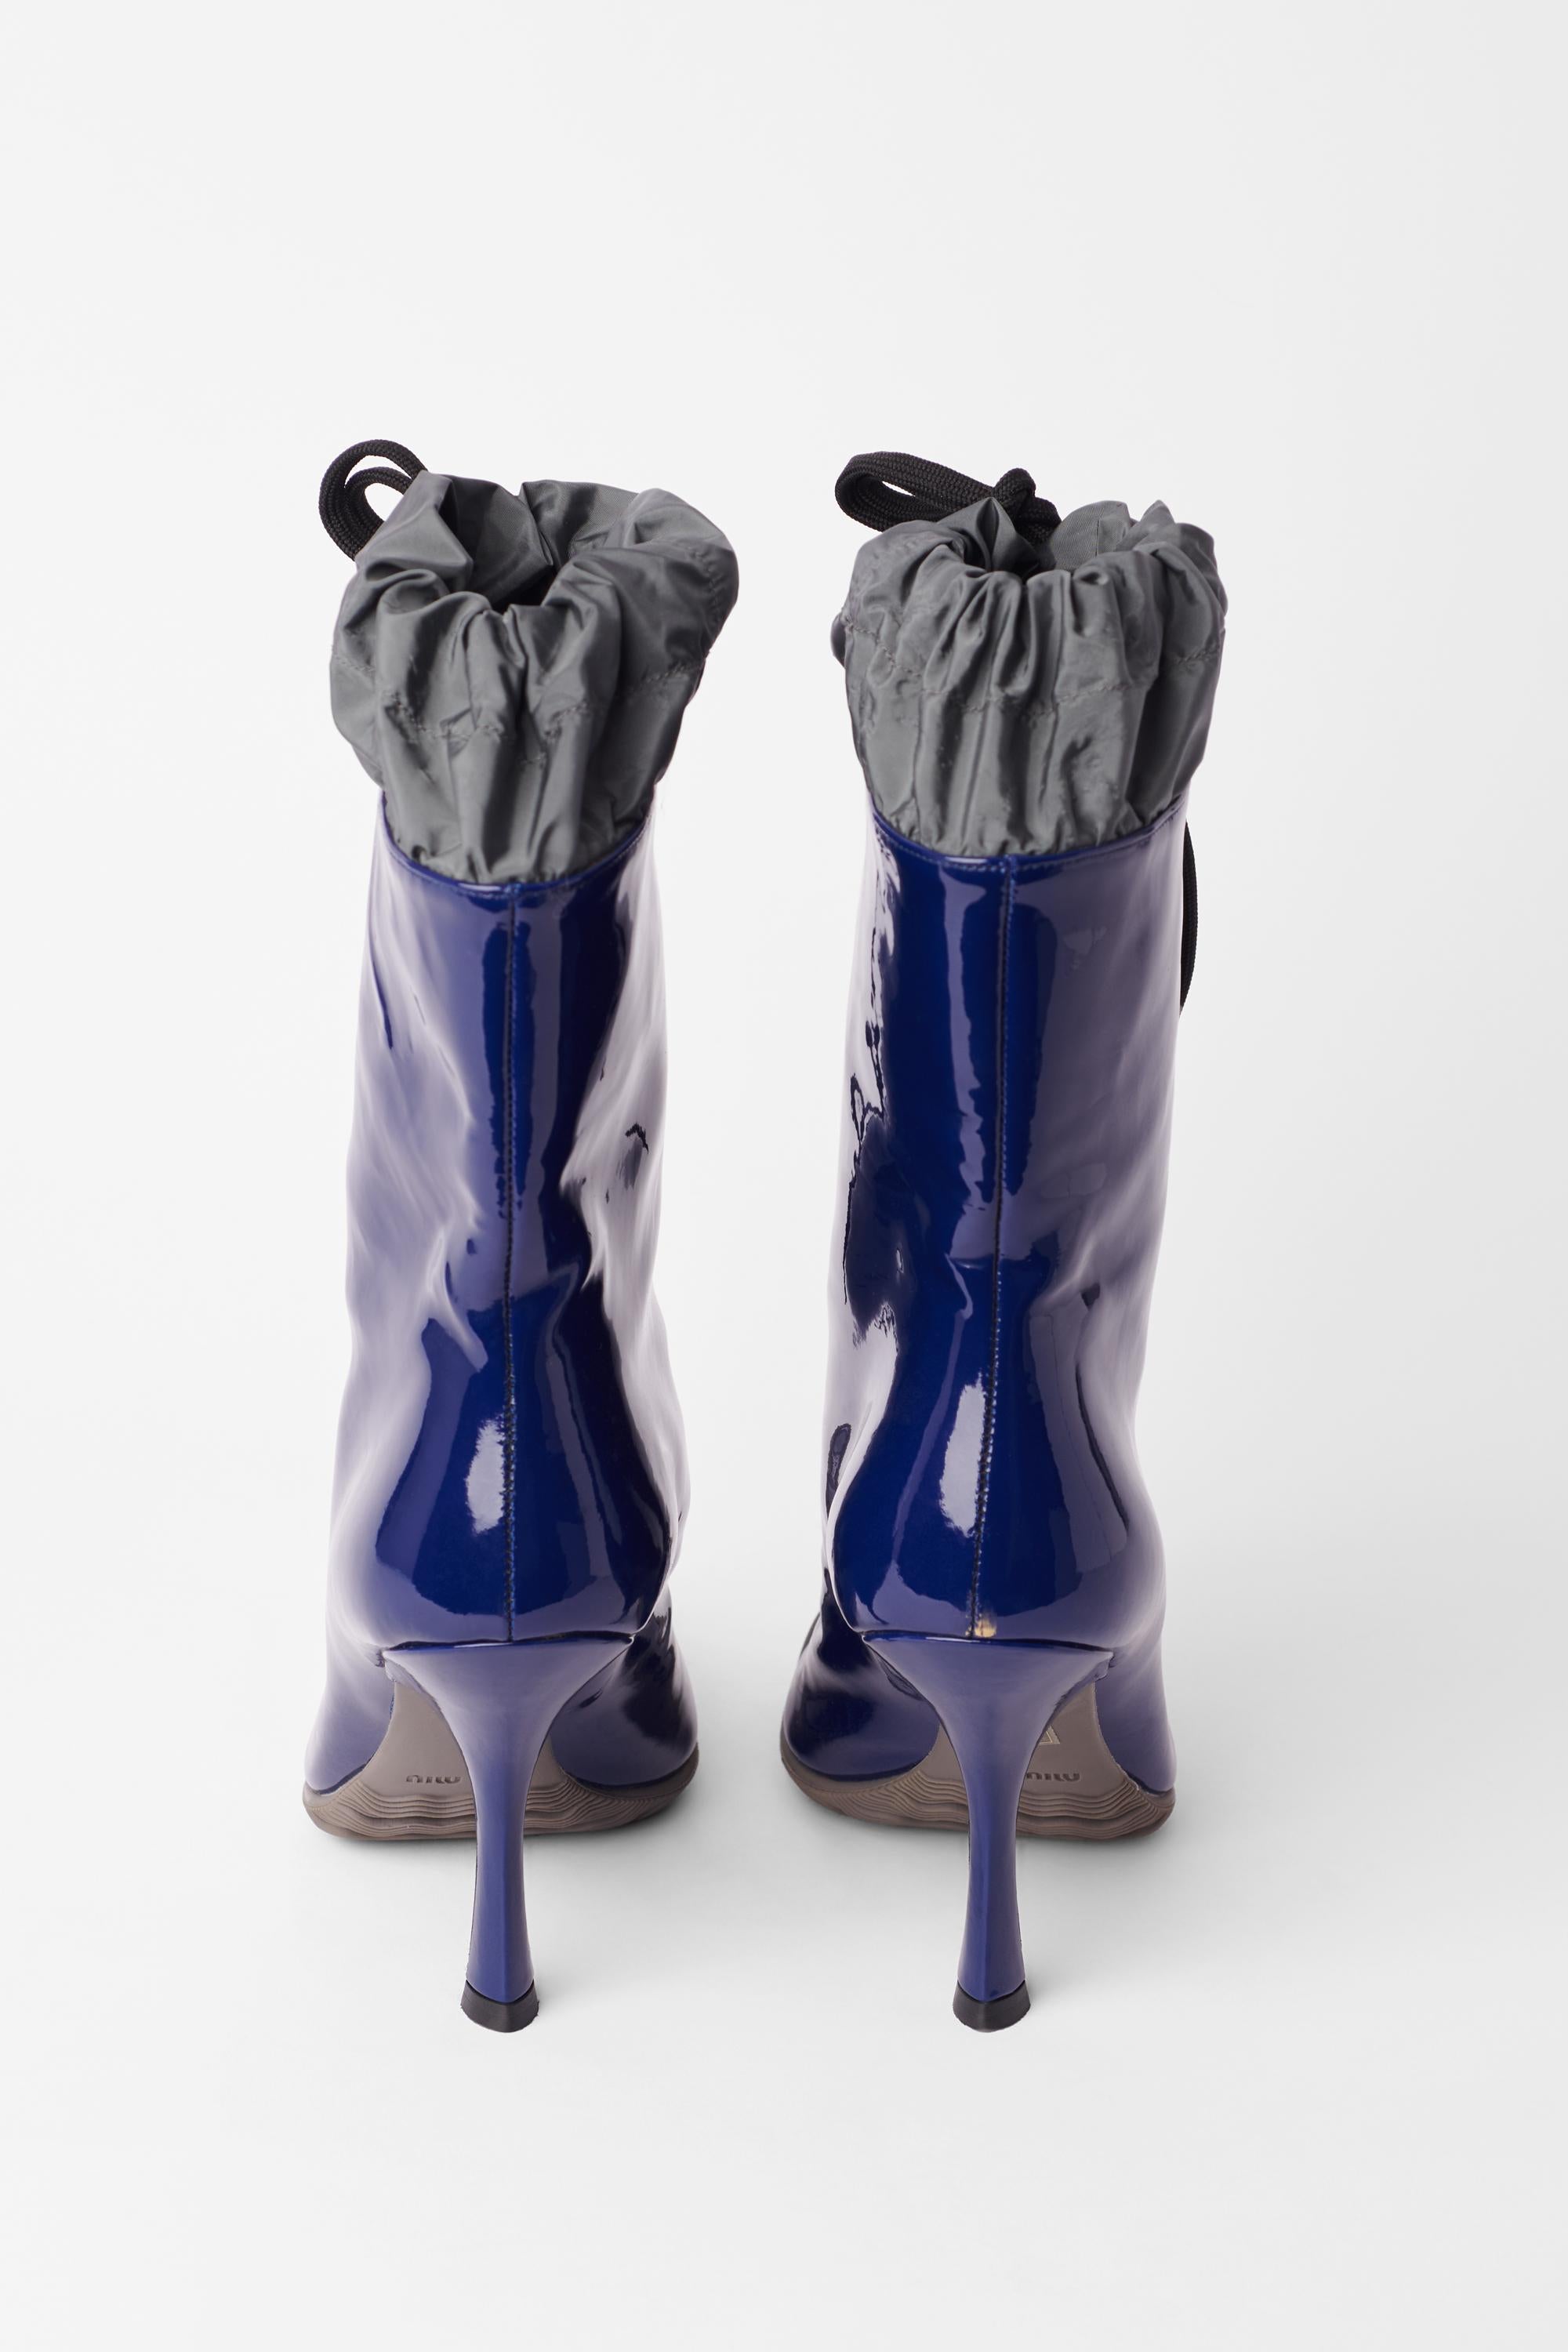 Miu Miu patent welly heel boots. Features rubber sole, patent leather main and drawstring upper. In excellent vintage condition, brand new. Authenticity Guaranteed.

Tag Size: EU 36
Modern Size: UK: 3.5, US: 5.5, EU: 36
Fabric: Rubber, Patent